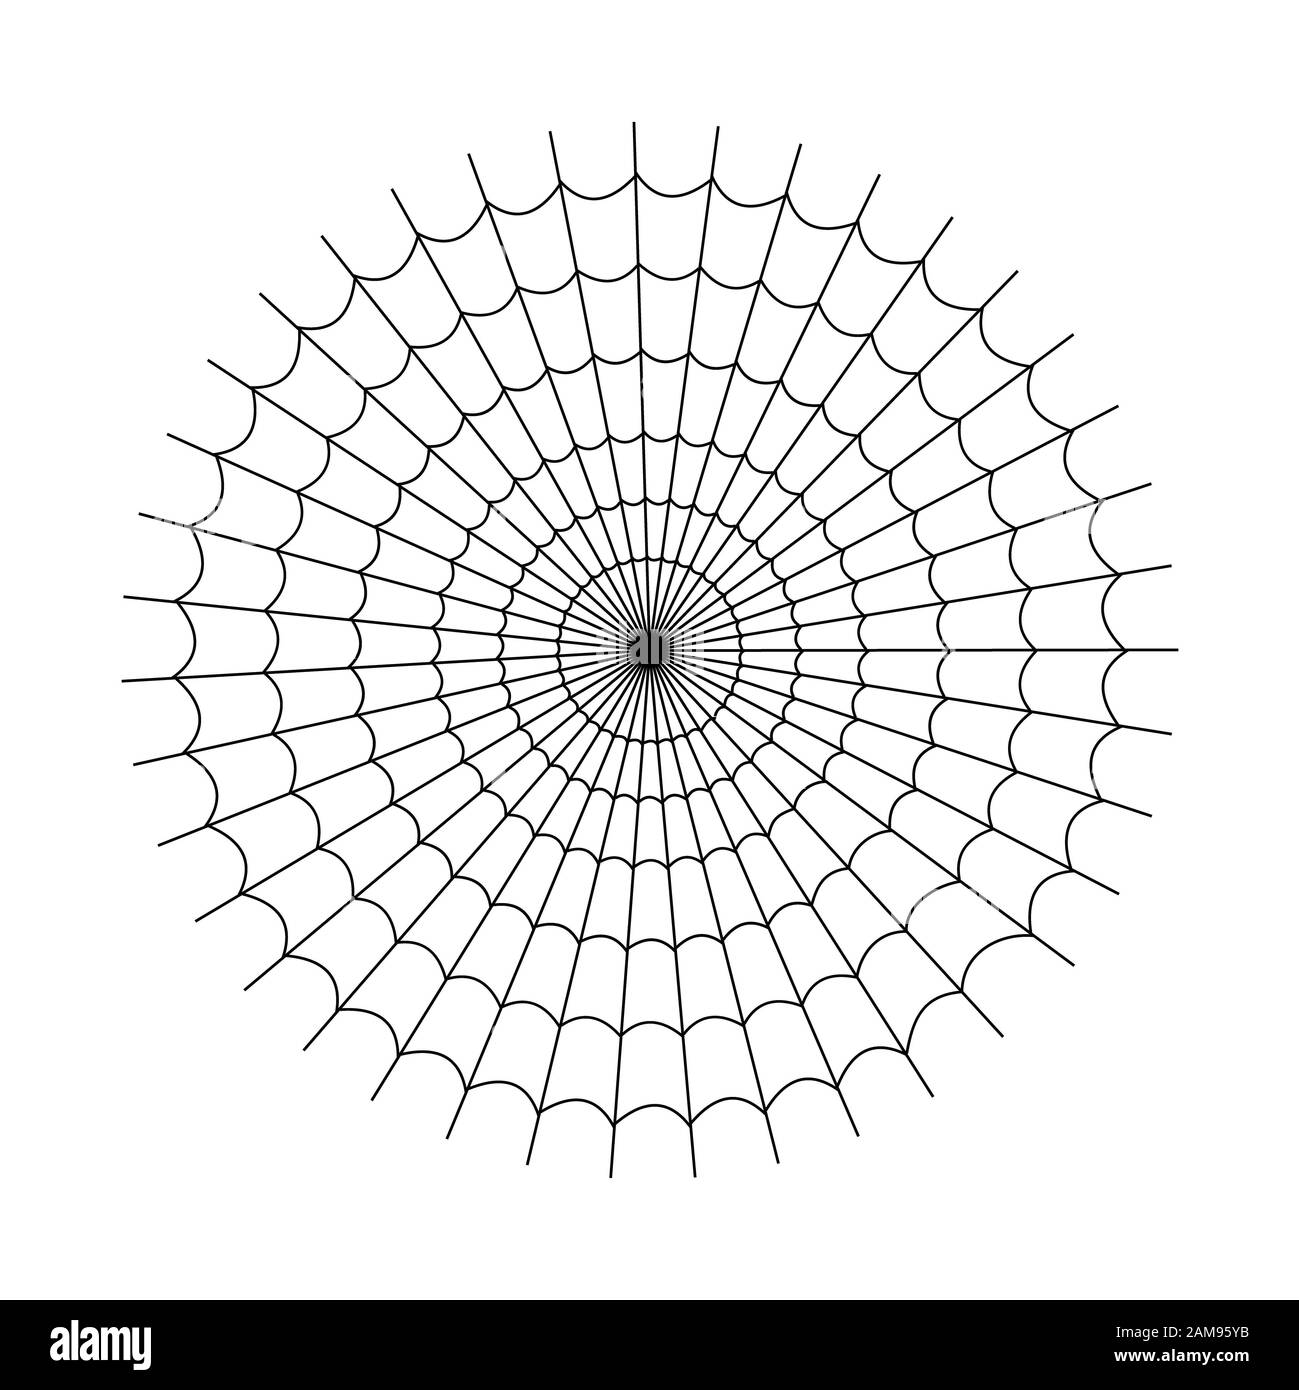 Black and white cartoon spider web. Simple image with cobweb for halloween party. Stock Photo